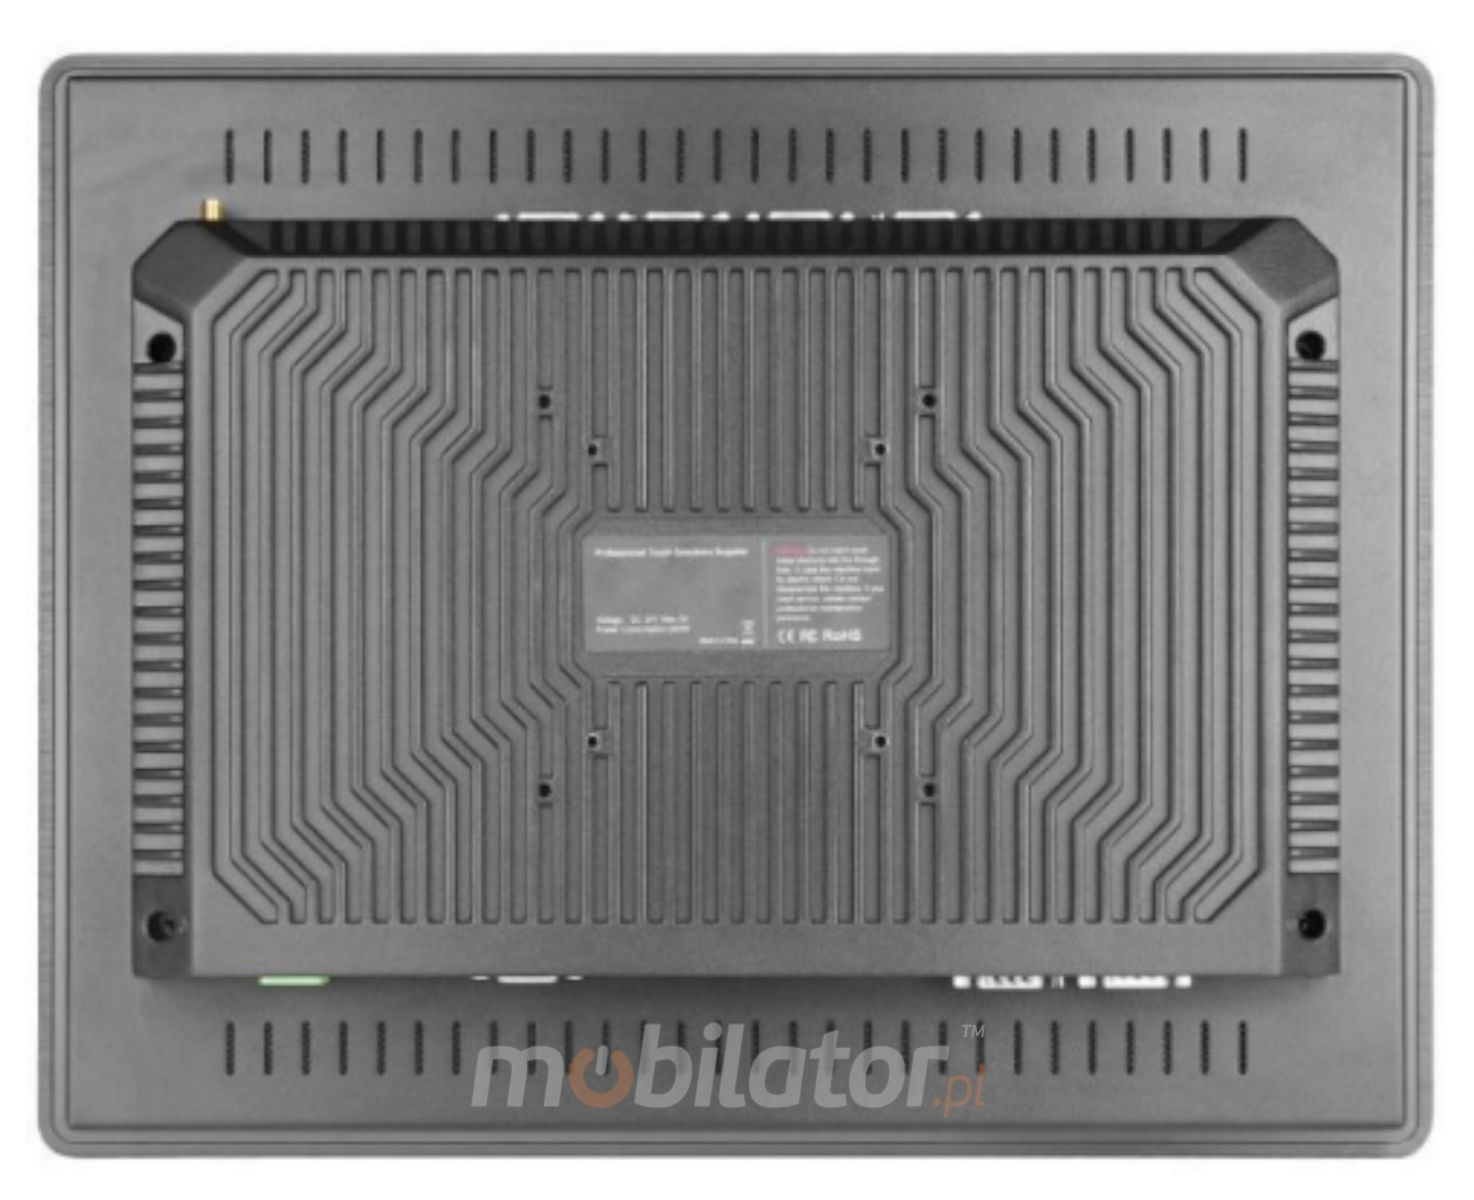 View of the back of the plate BIBOX-150PC2 with passive cooling